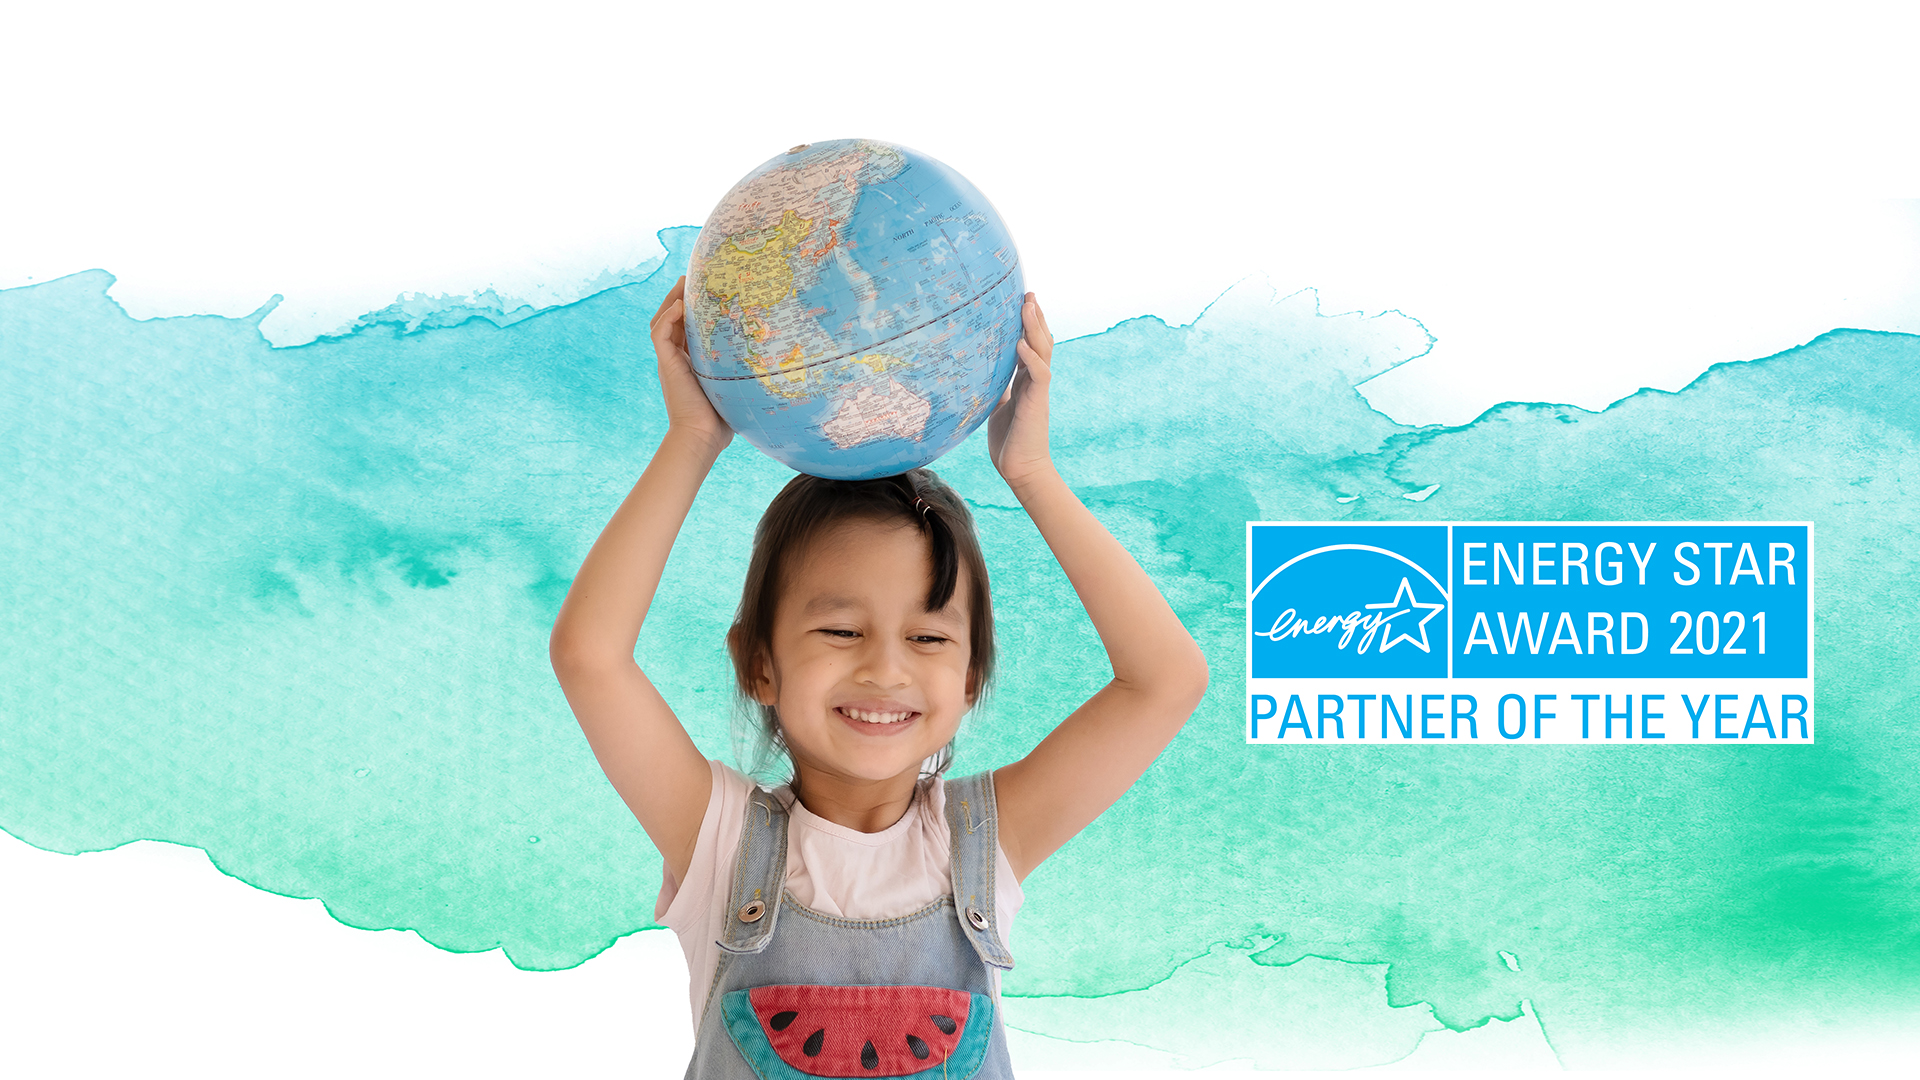 Earth day image with girl holding globe